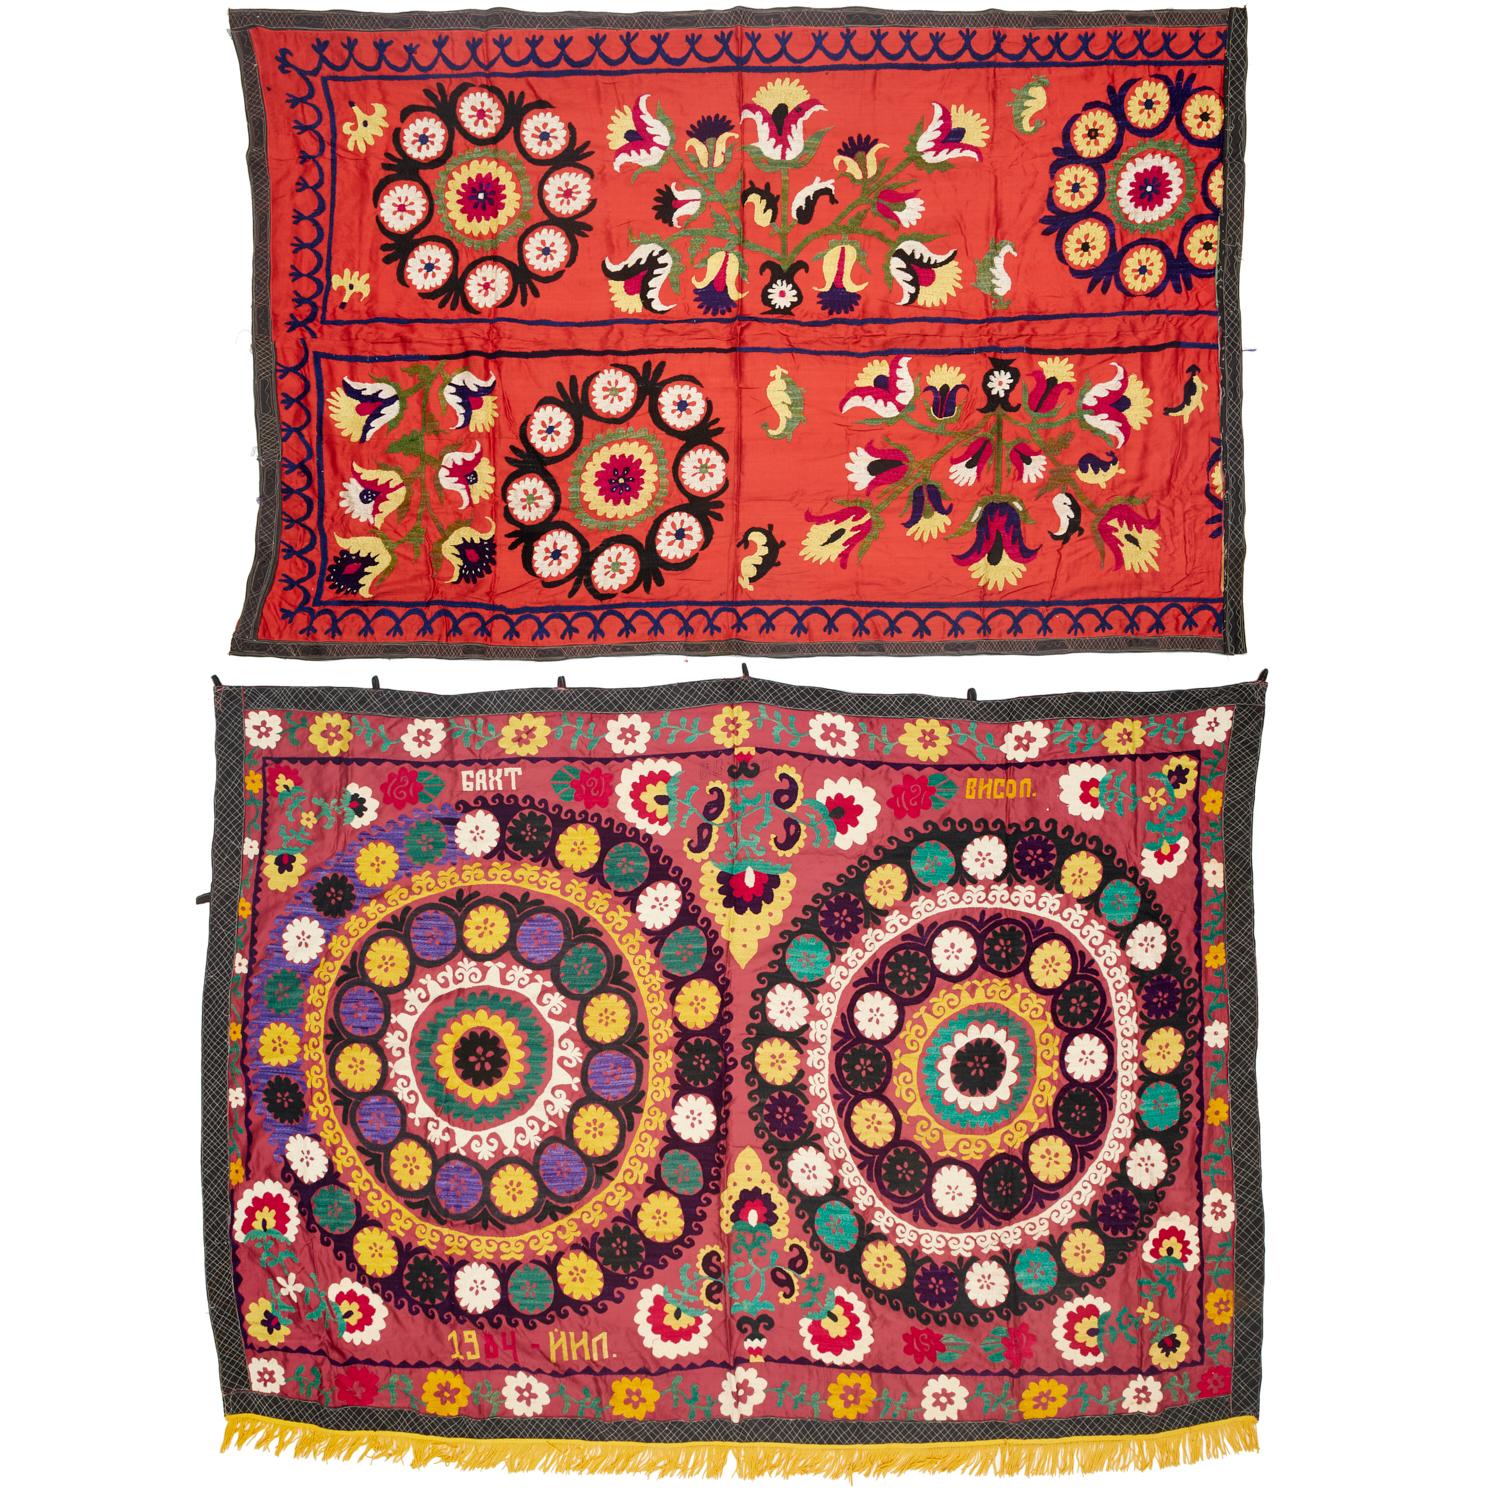 Two Vintage Embroidered Suzani Style Textiles from Central Asia - Ex Lewis Stein For Sale 4